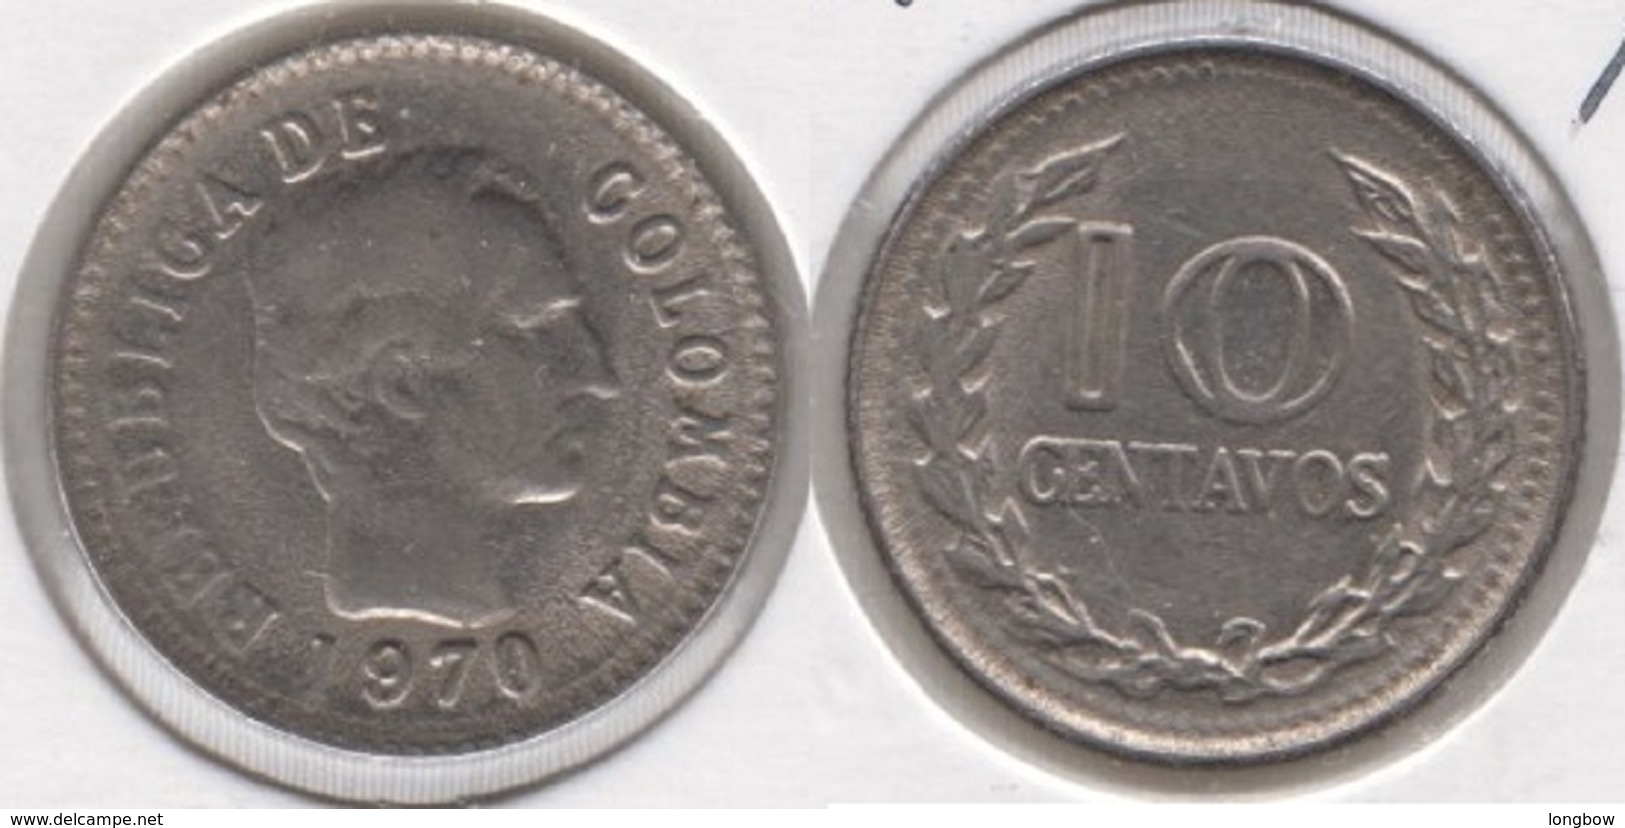 Colombia 10 Centavos 1970 KM#236 - Used - Colombia